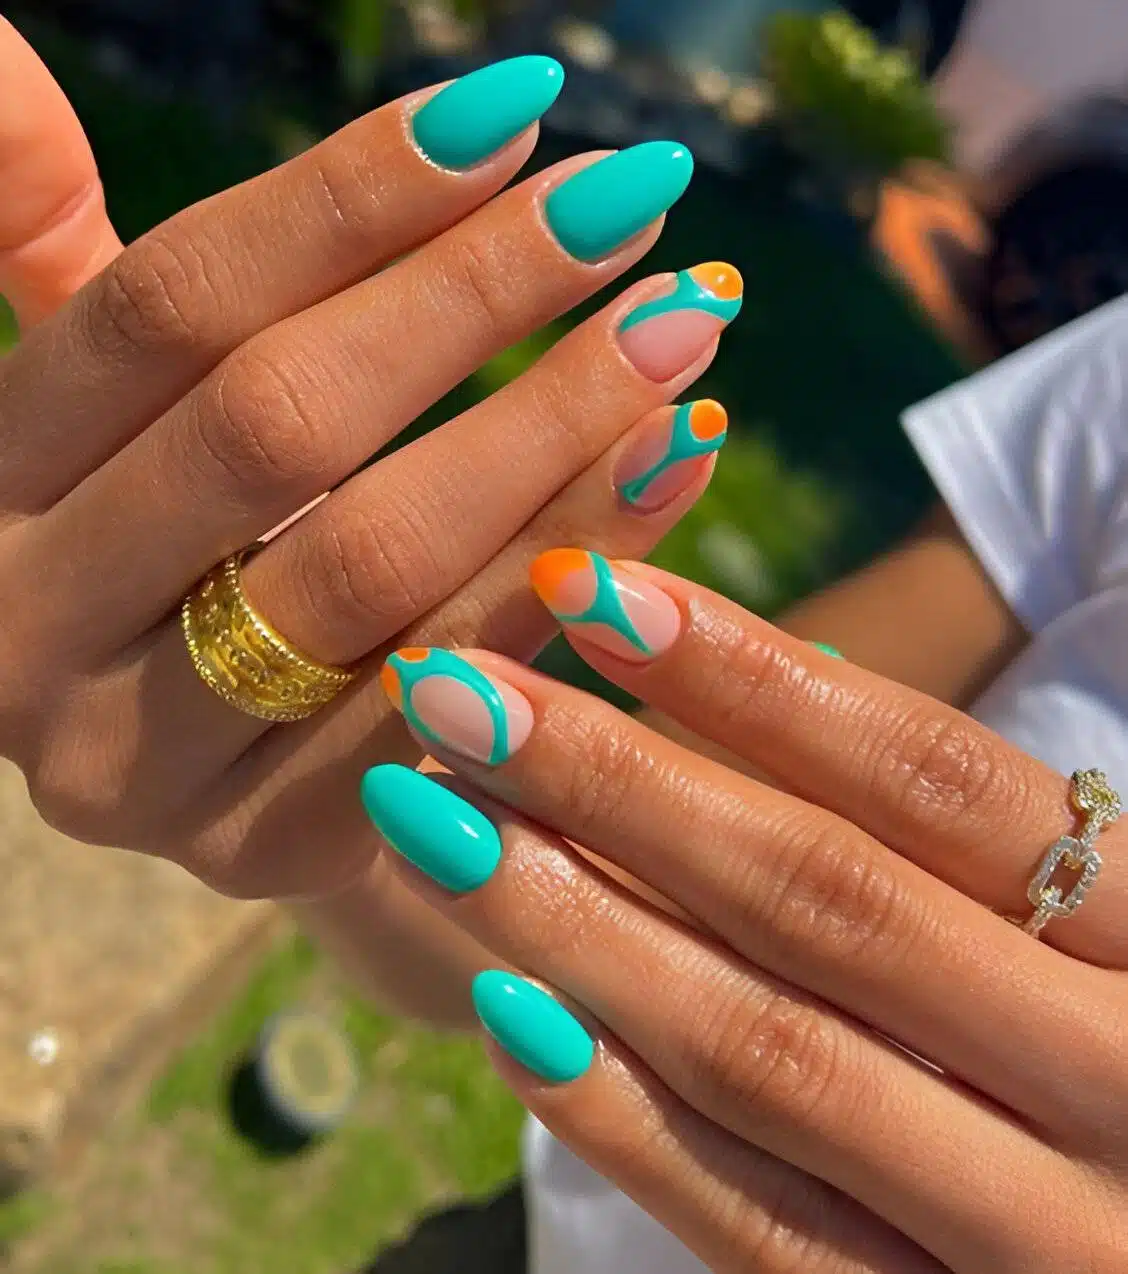 30 Colorful Nail Art Designs To Have Fun And Stay Fabulous - 225